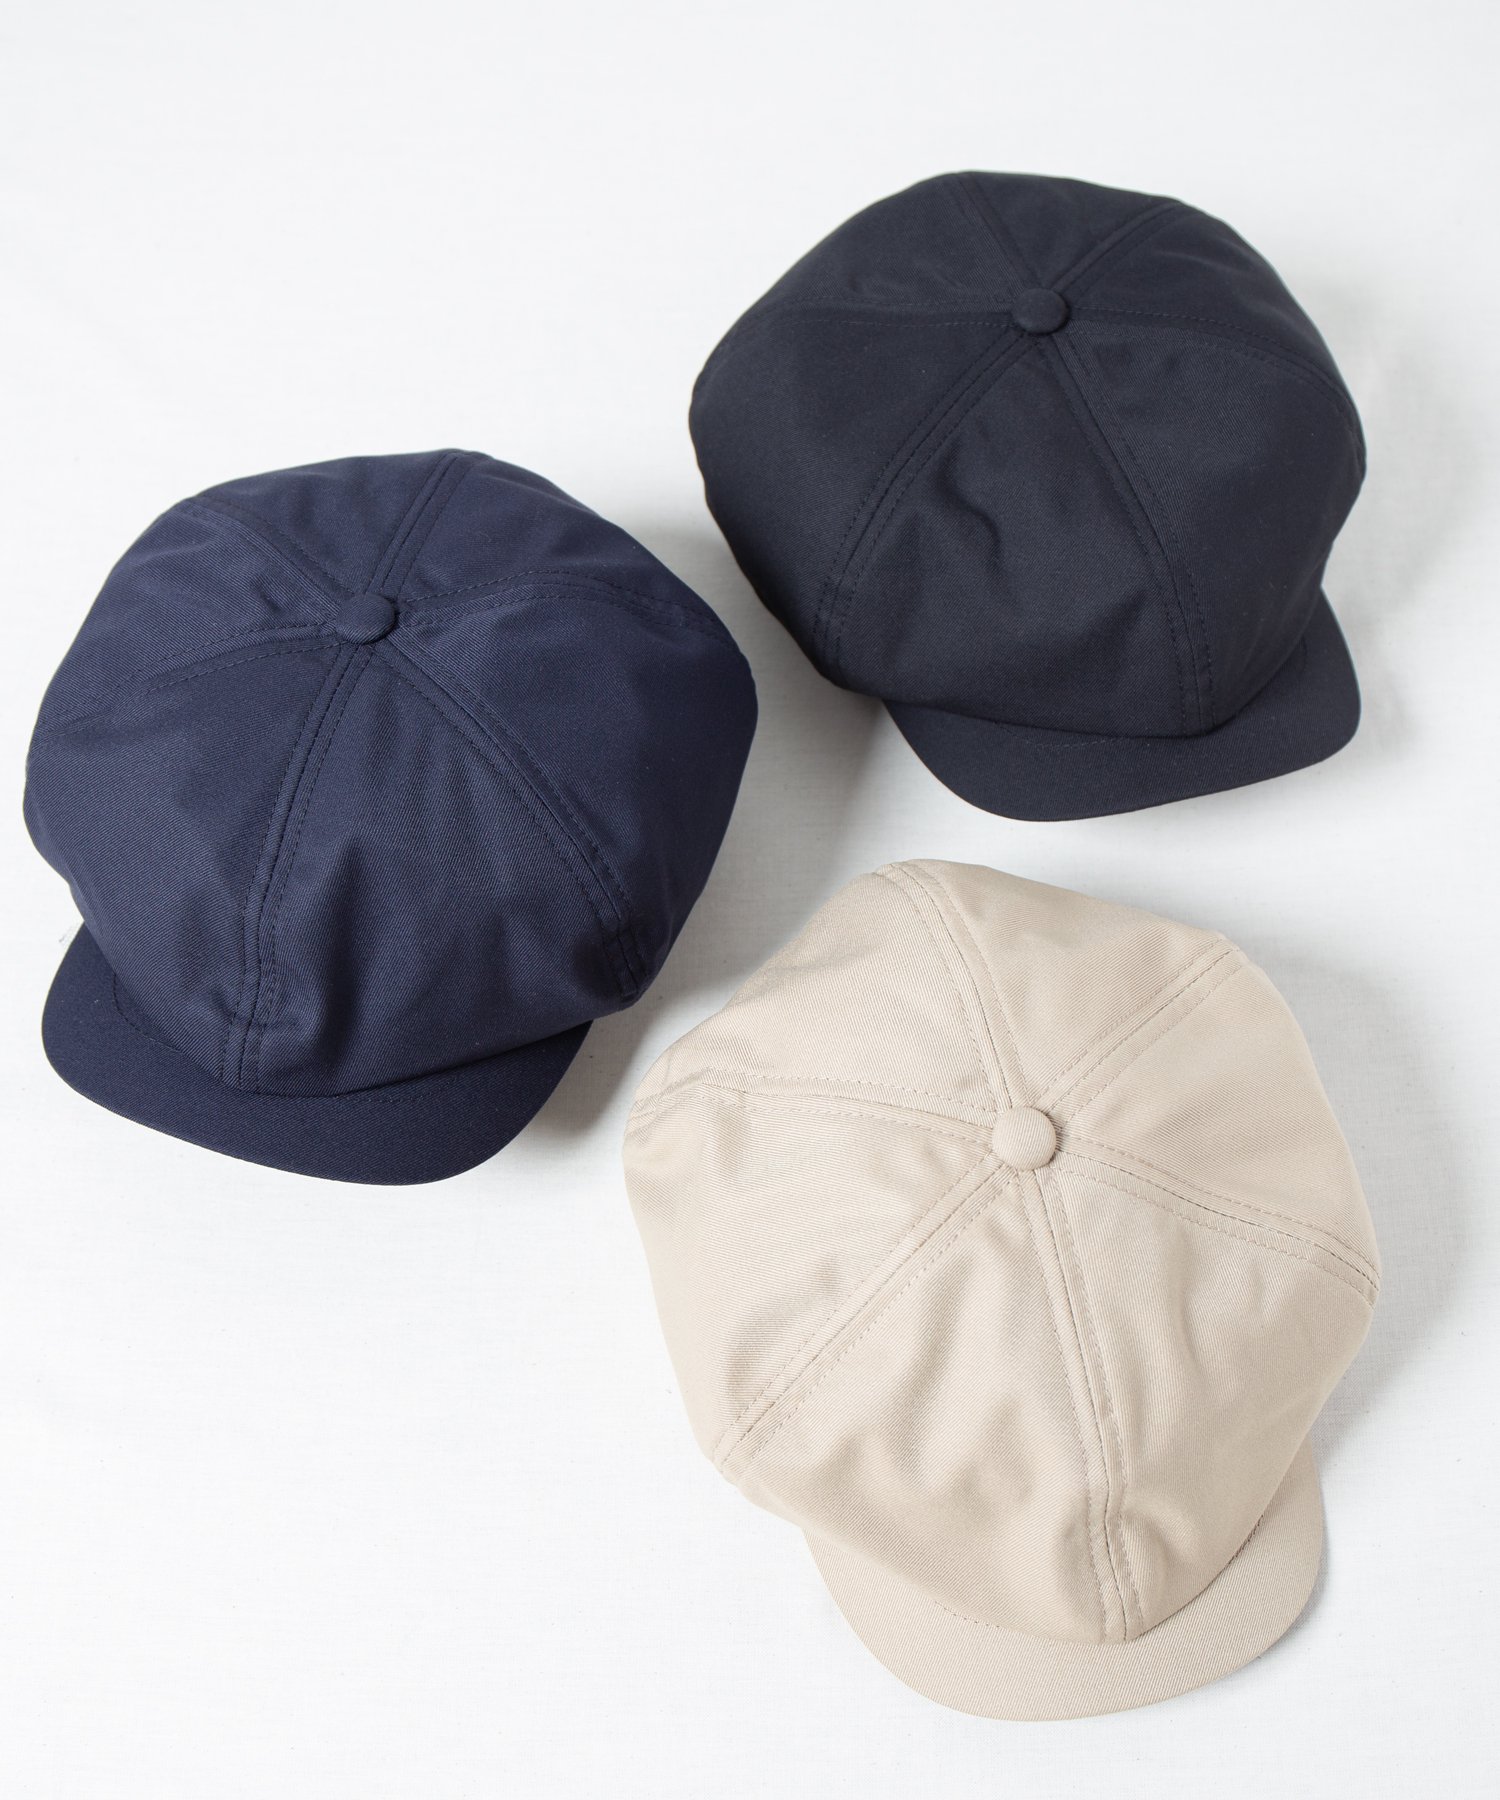 <img class='new_mark_img1' src='https://img.shop-pro.jp/img/new/icons20.gif' style='border:none;display:inline;margin:0px;padding:0px;width:auto;' />RACAL Recycle Polyester Blend Twill News Boy Cap 1281 リサイクルポリブレンドツイルニュースボーイキャップ